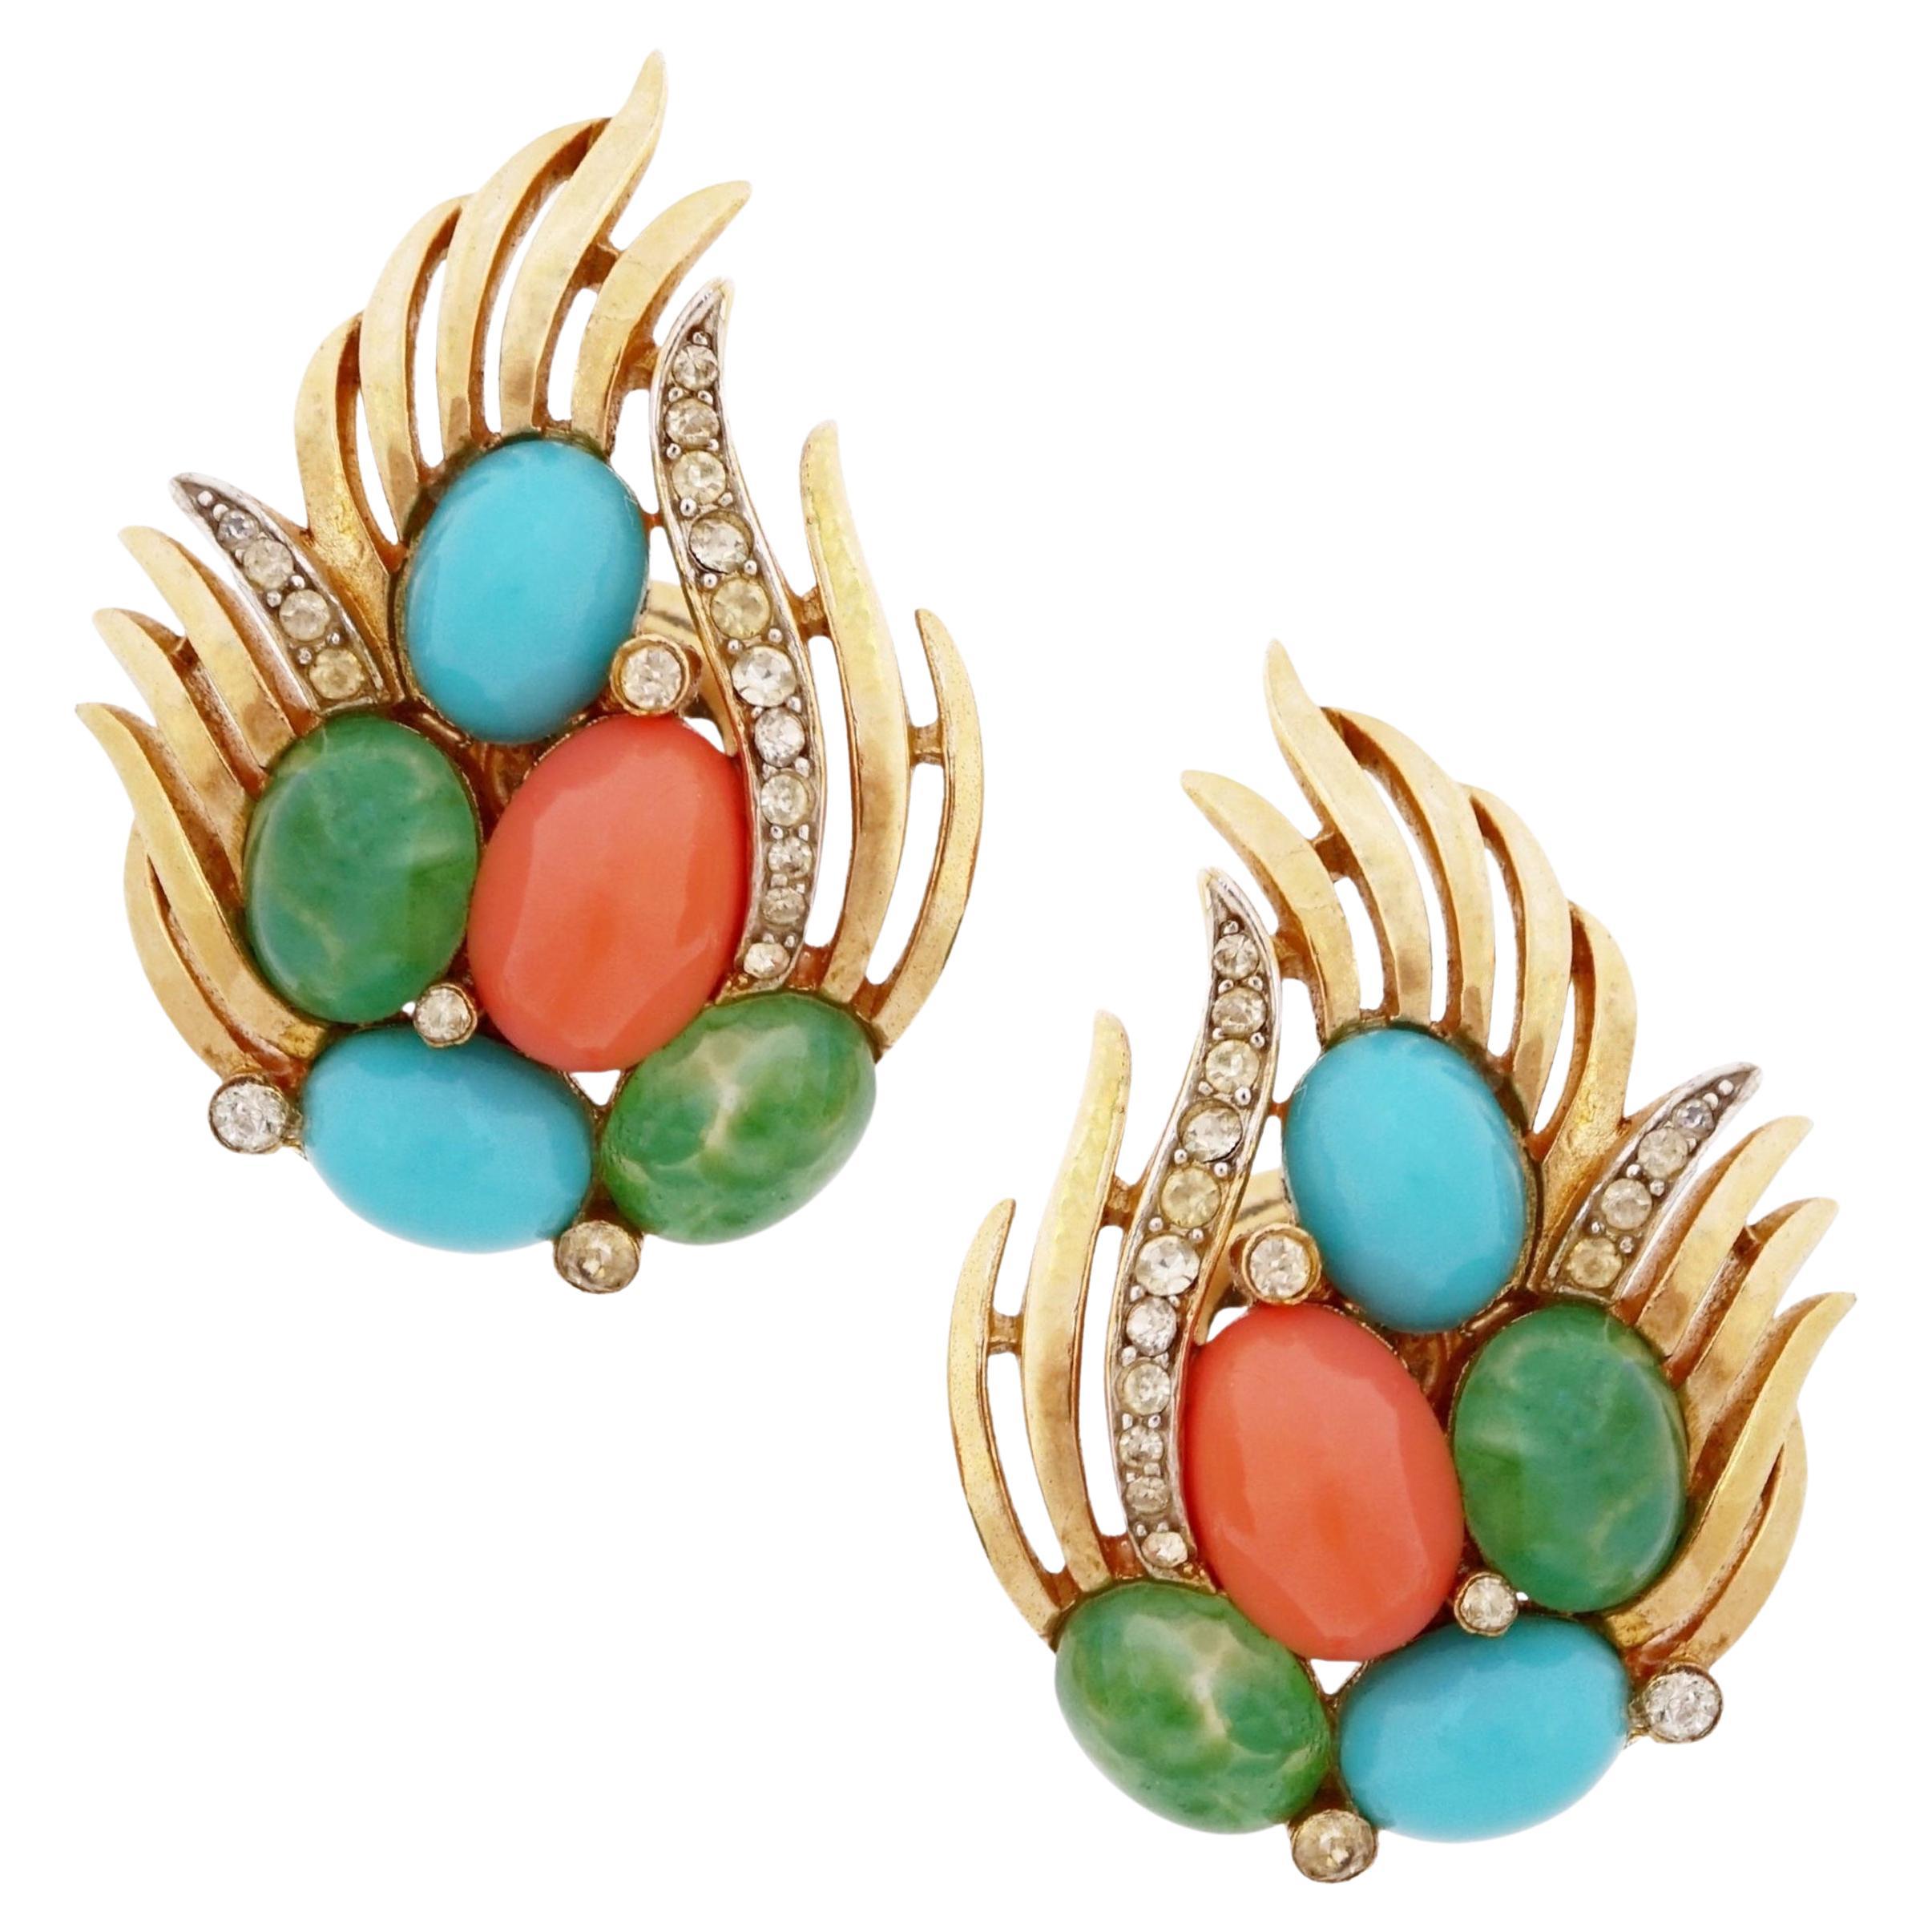 Turquoise, Coral and Jade "Jewels of India" Earrings By Crown Trifari, 1960s